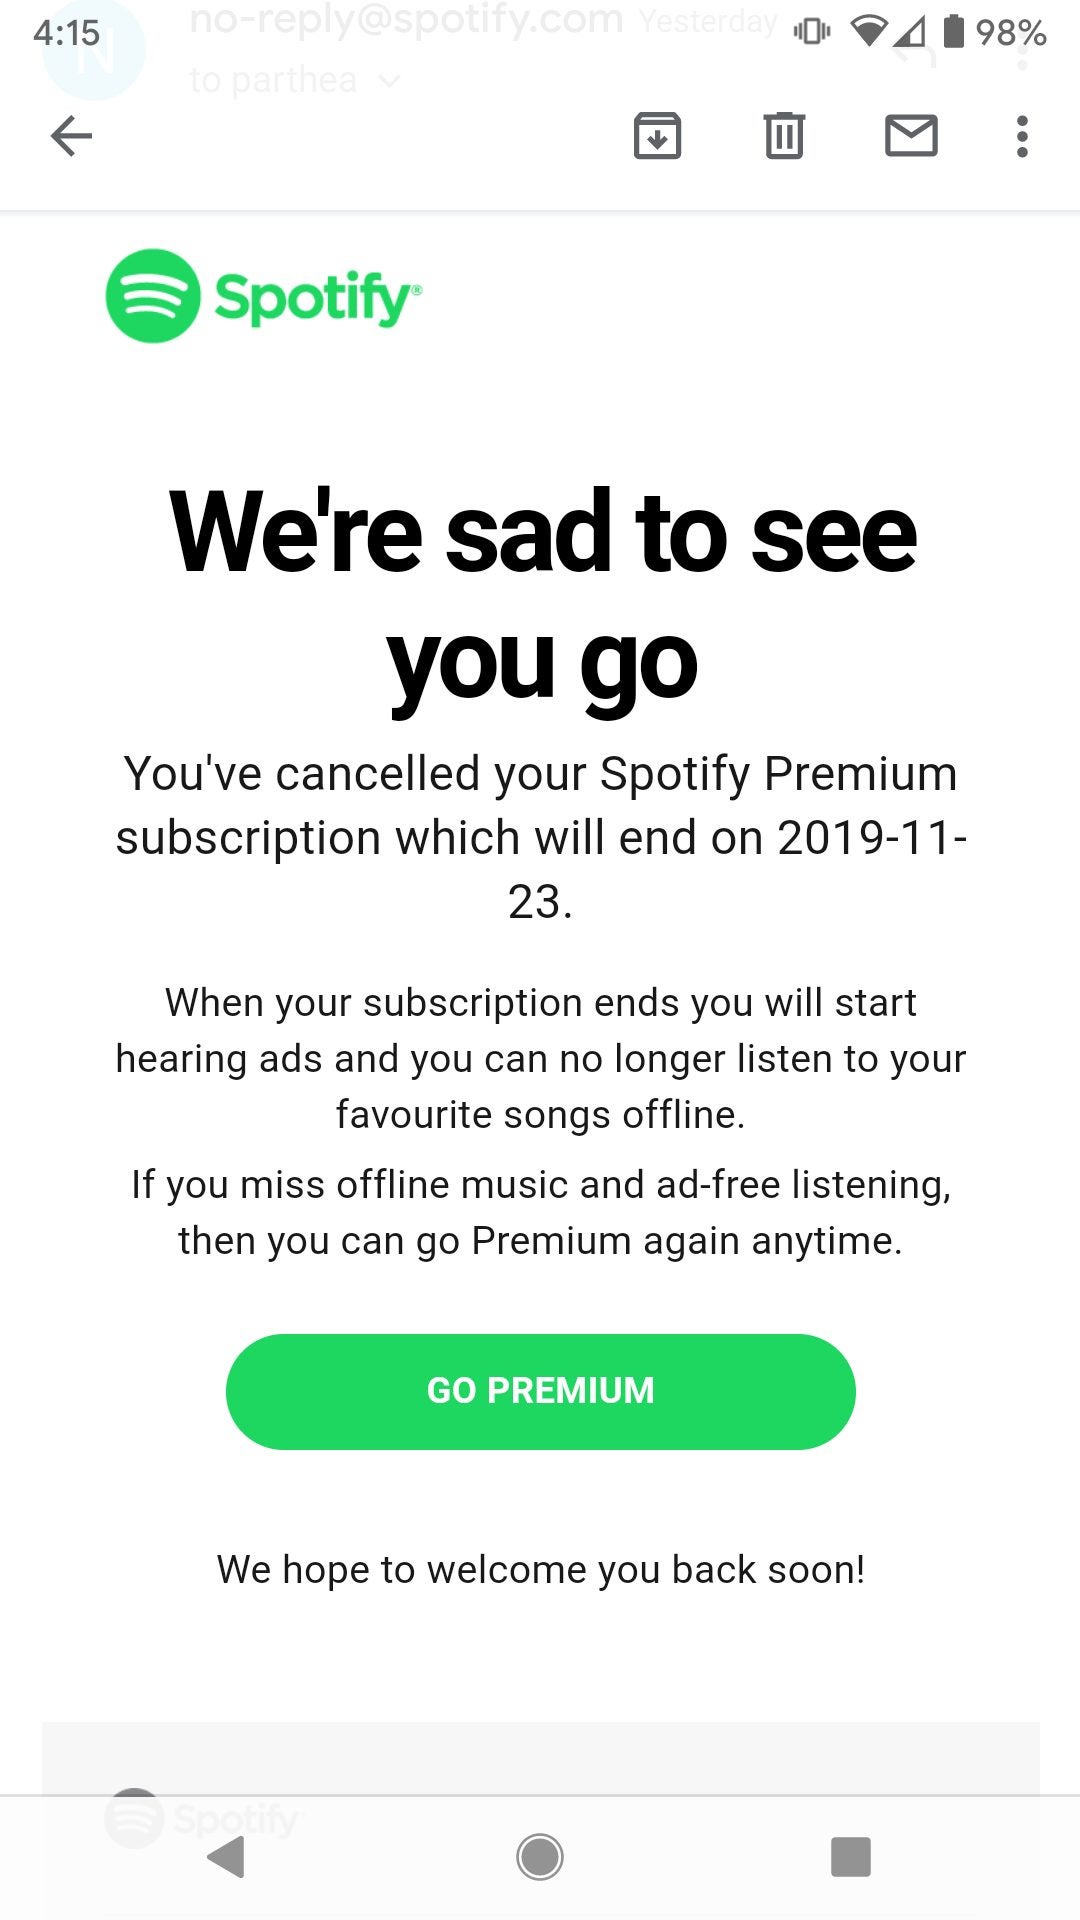 how to cancel spotify premium trial on phone